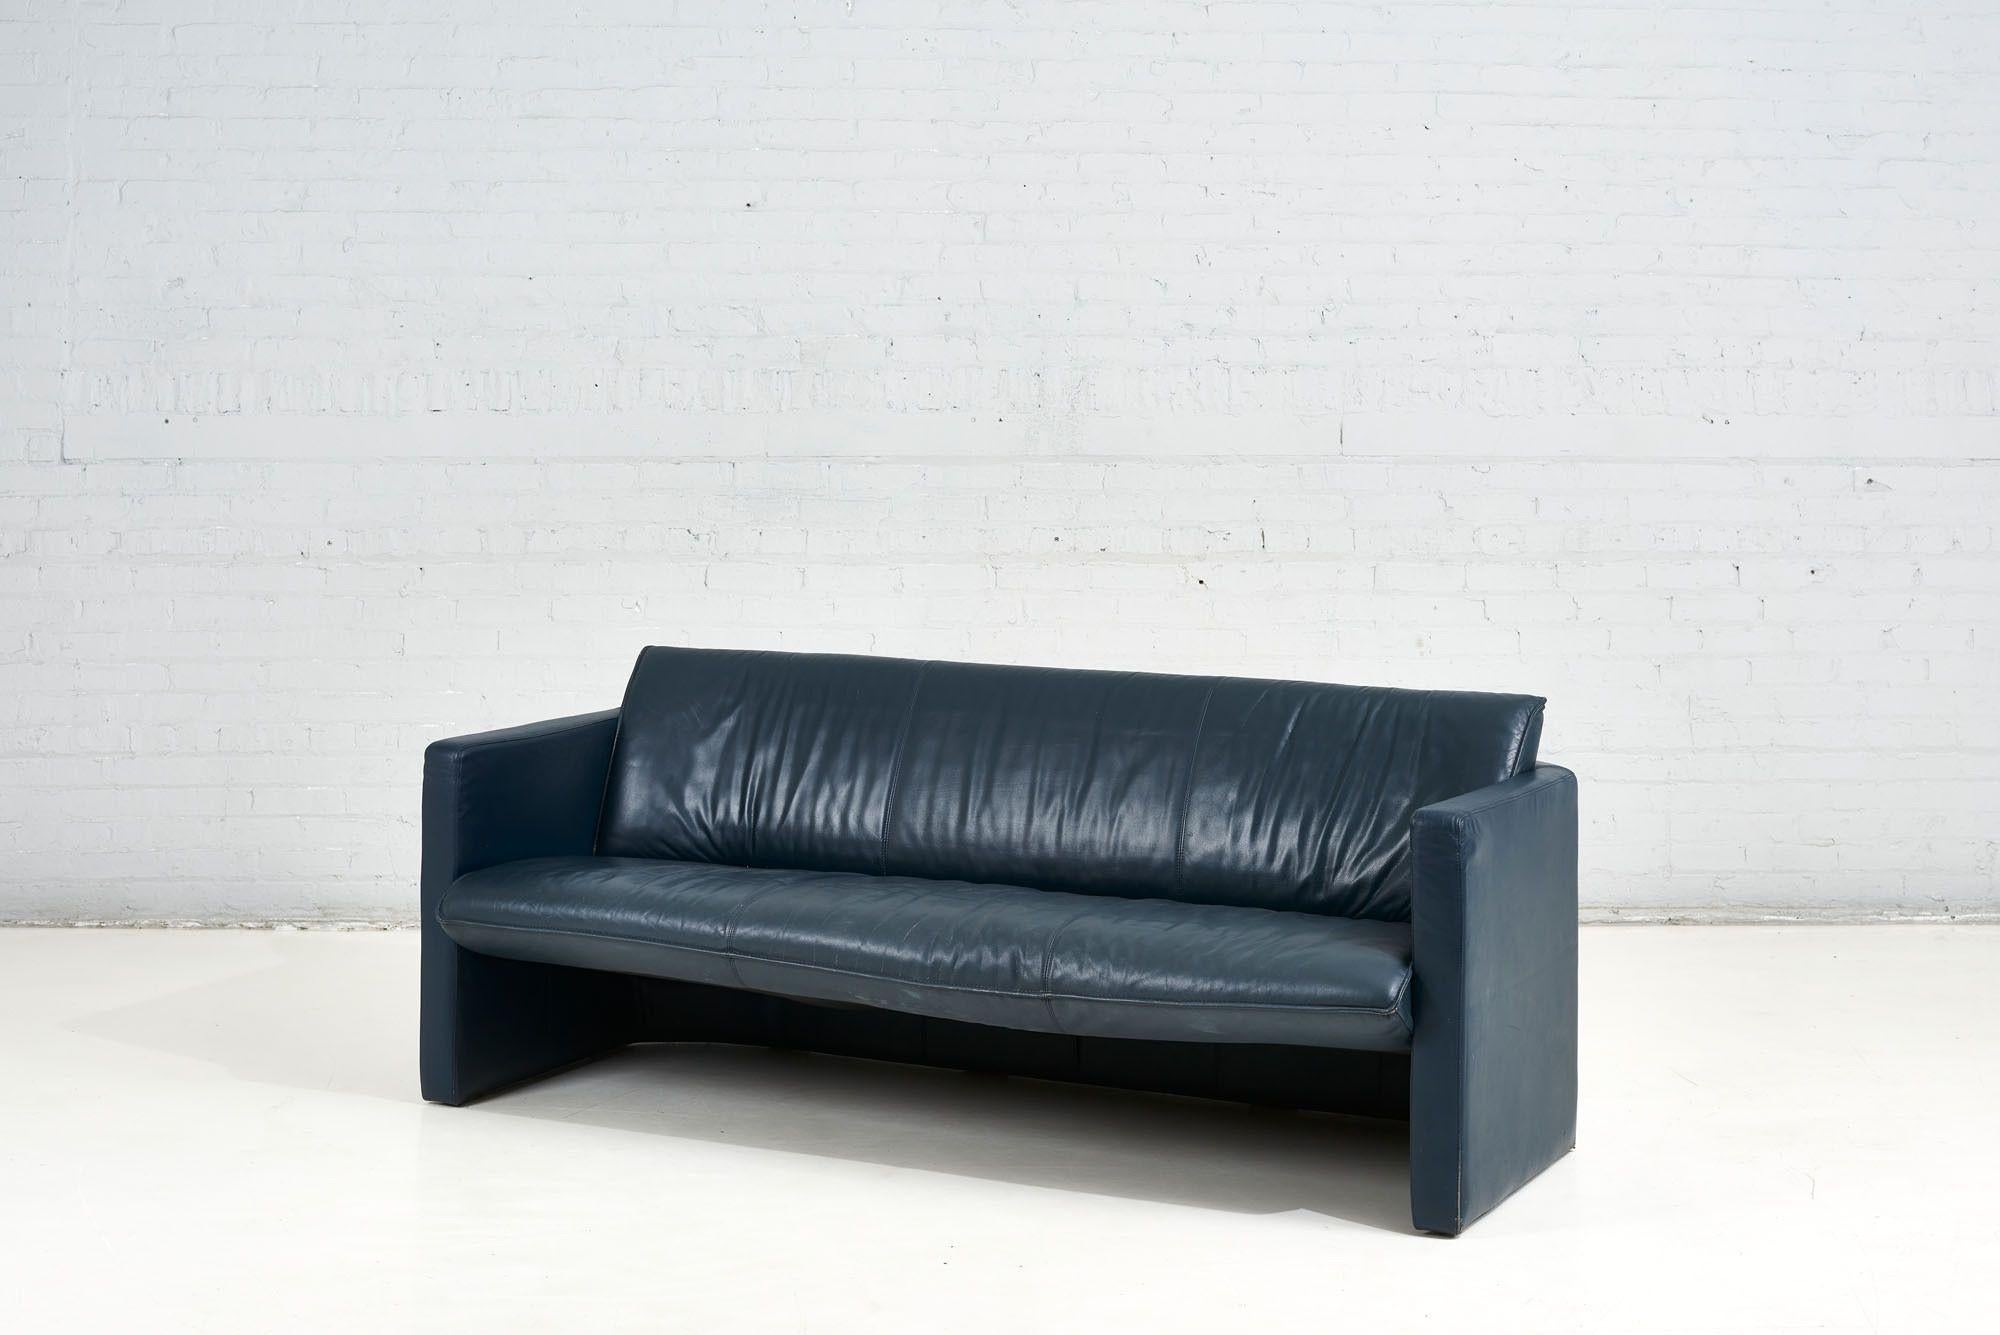 Postmodern Leather Sofa by Leolux, 1970. Original leather. Pair chairs are sold in separate listing.